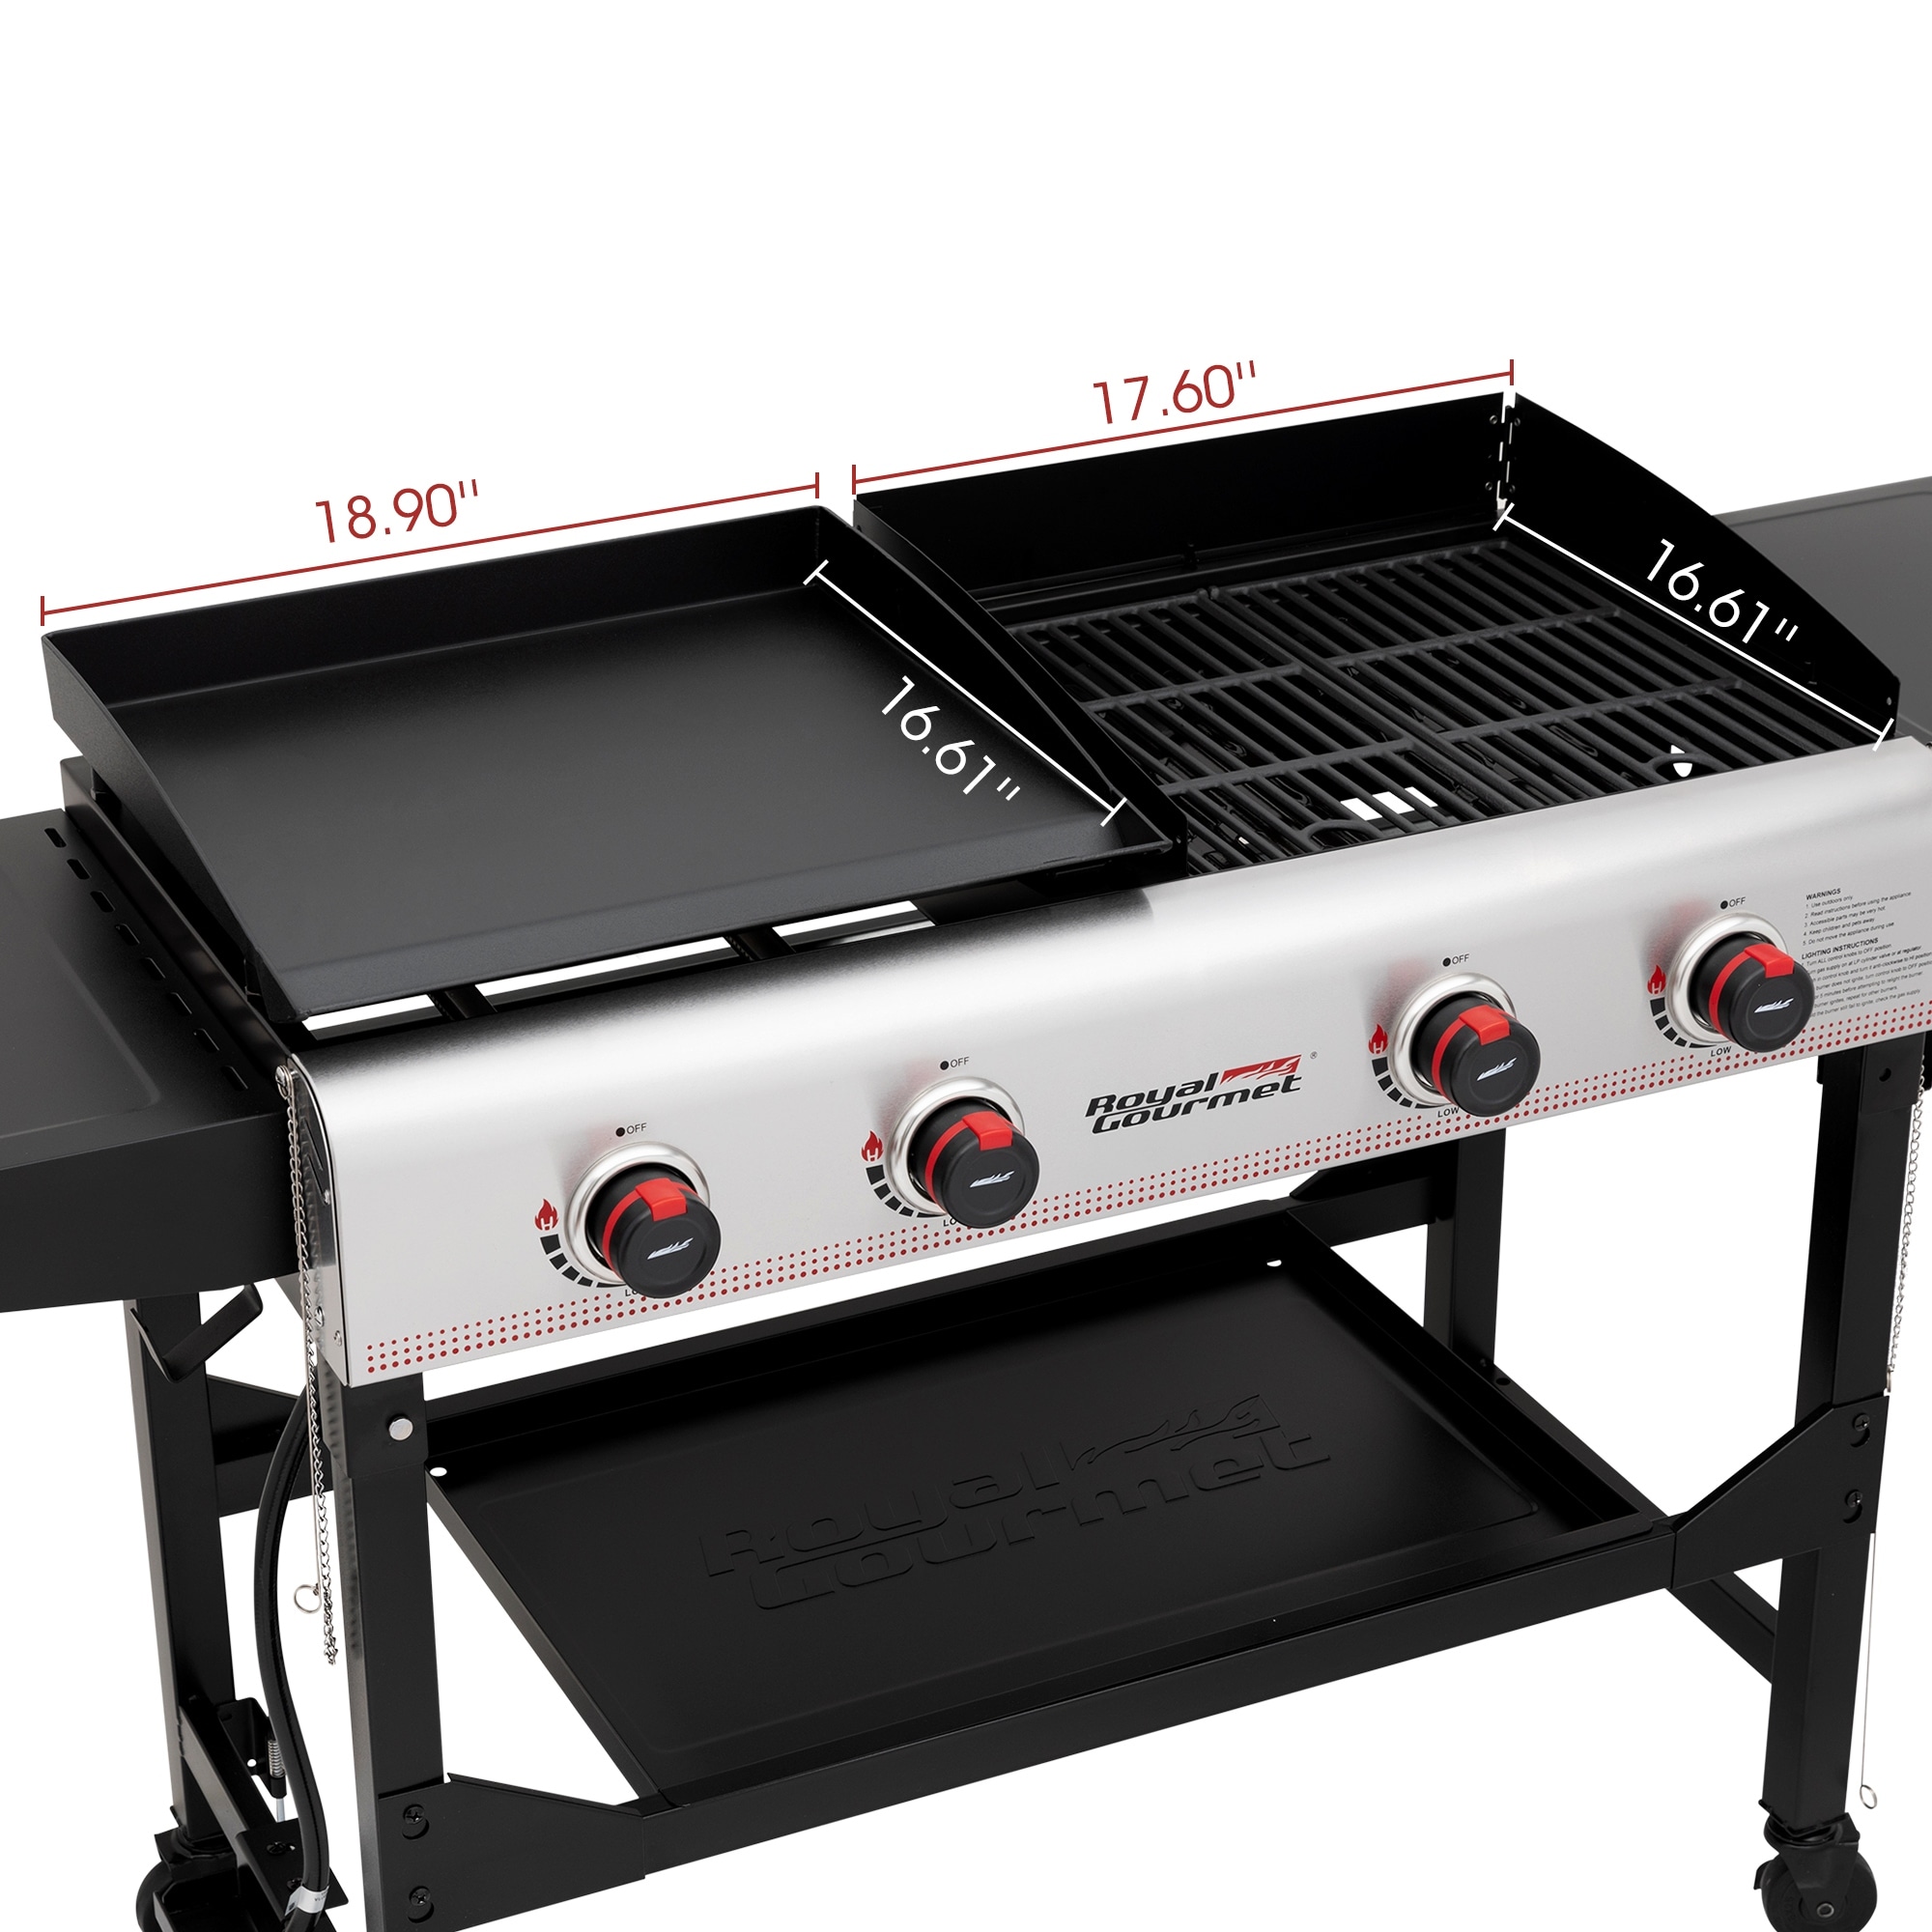 https://ak1.ostkcdn.com/images/products/is/images/direct/ac7fd62e0fd58747428b41ab71bf8b3a34241c5b/Royal-Gourmet-GD403-4-Burner-Portable-Flat-Top-Gas-Grill-and-Griddle-Combo-Grill-with-Folding-Legs%2C-48%2C000-BTU%2C-Black-%26-Silver.jpg